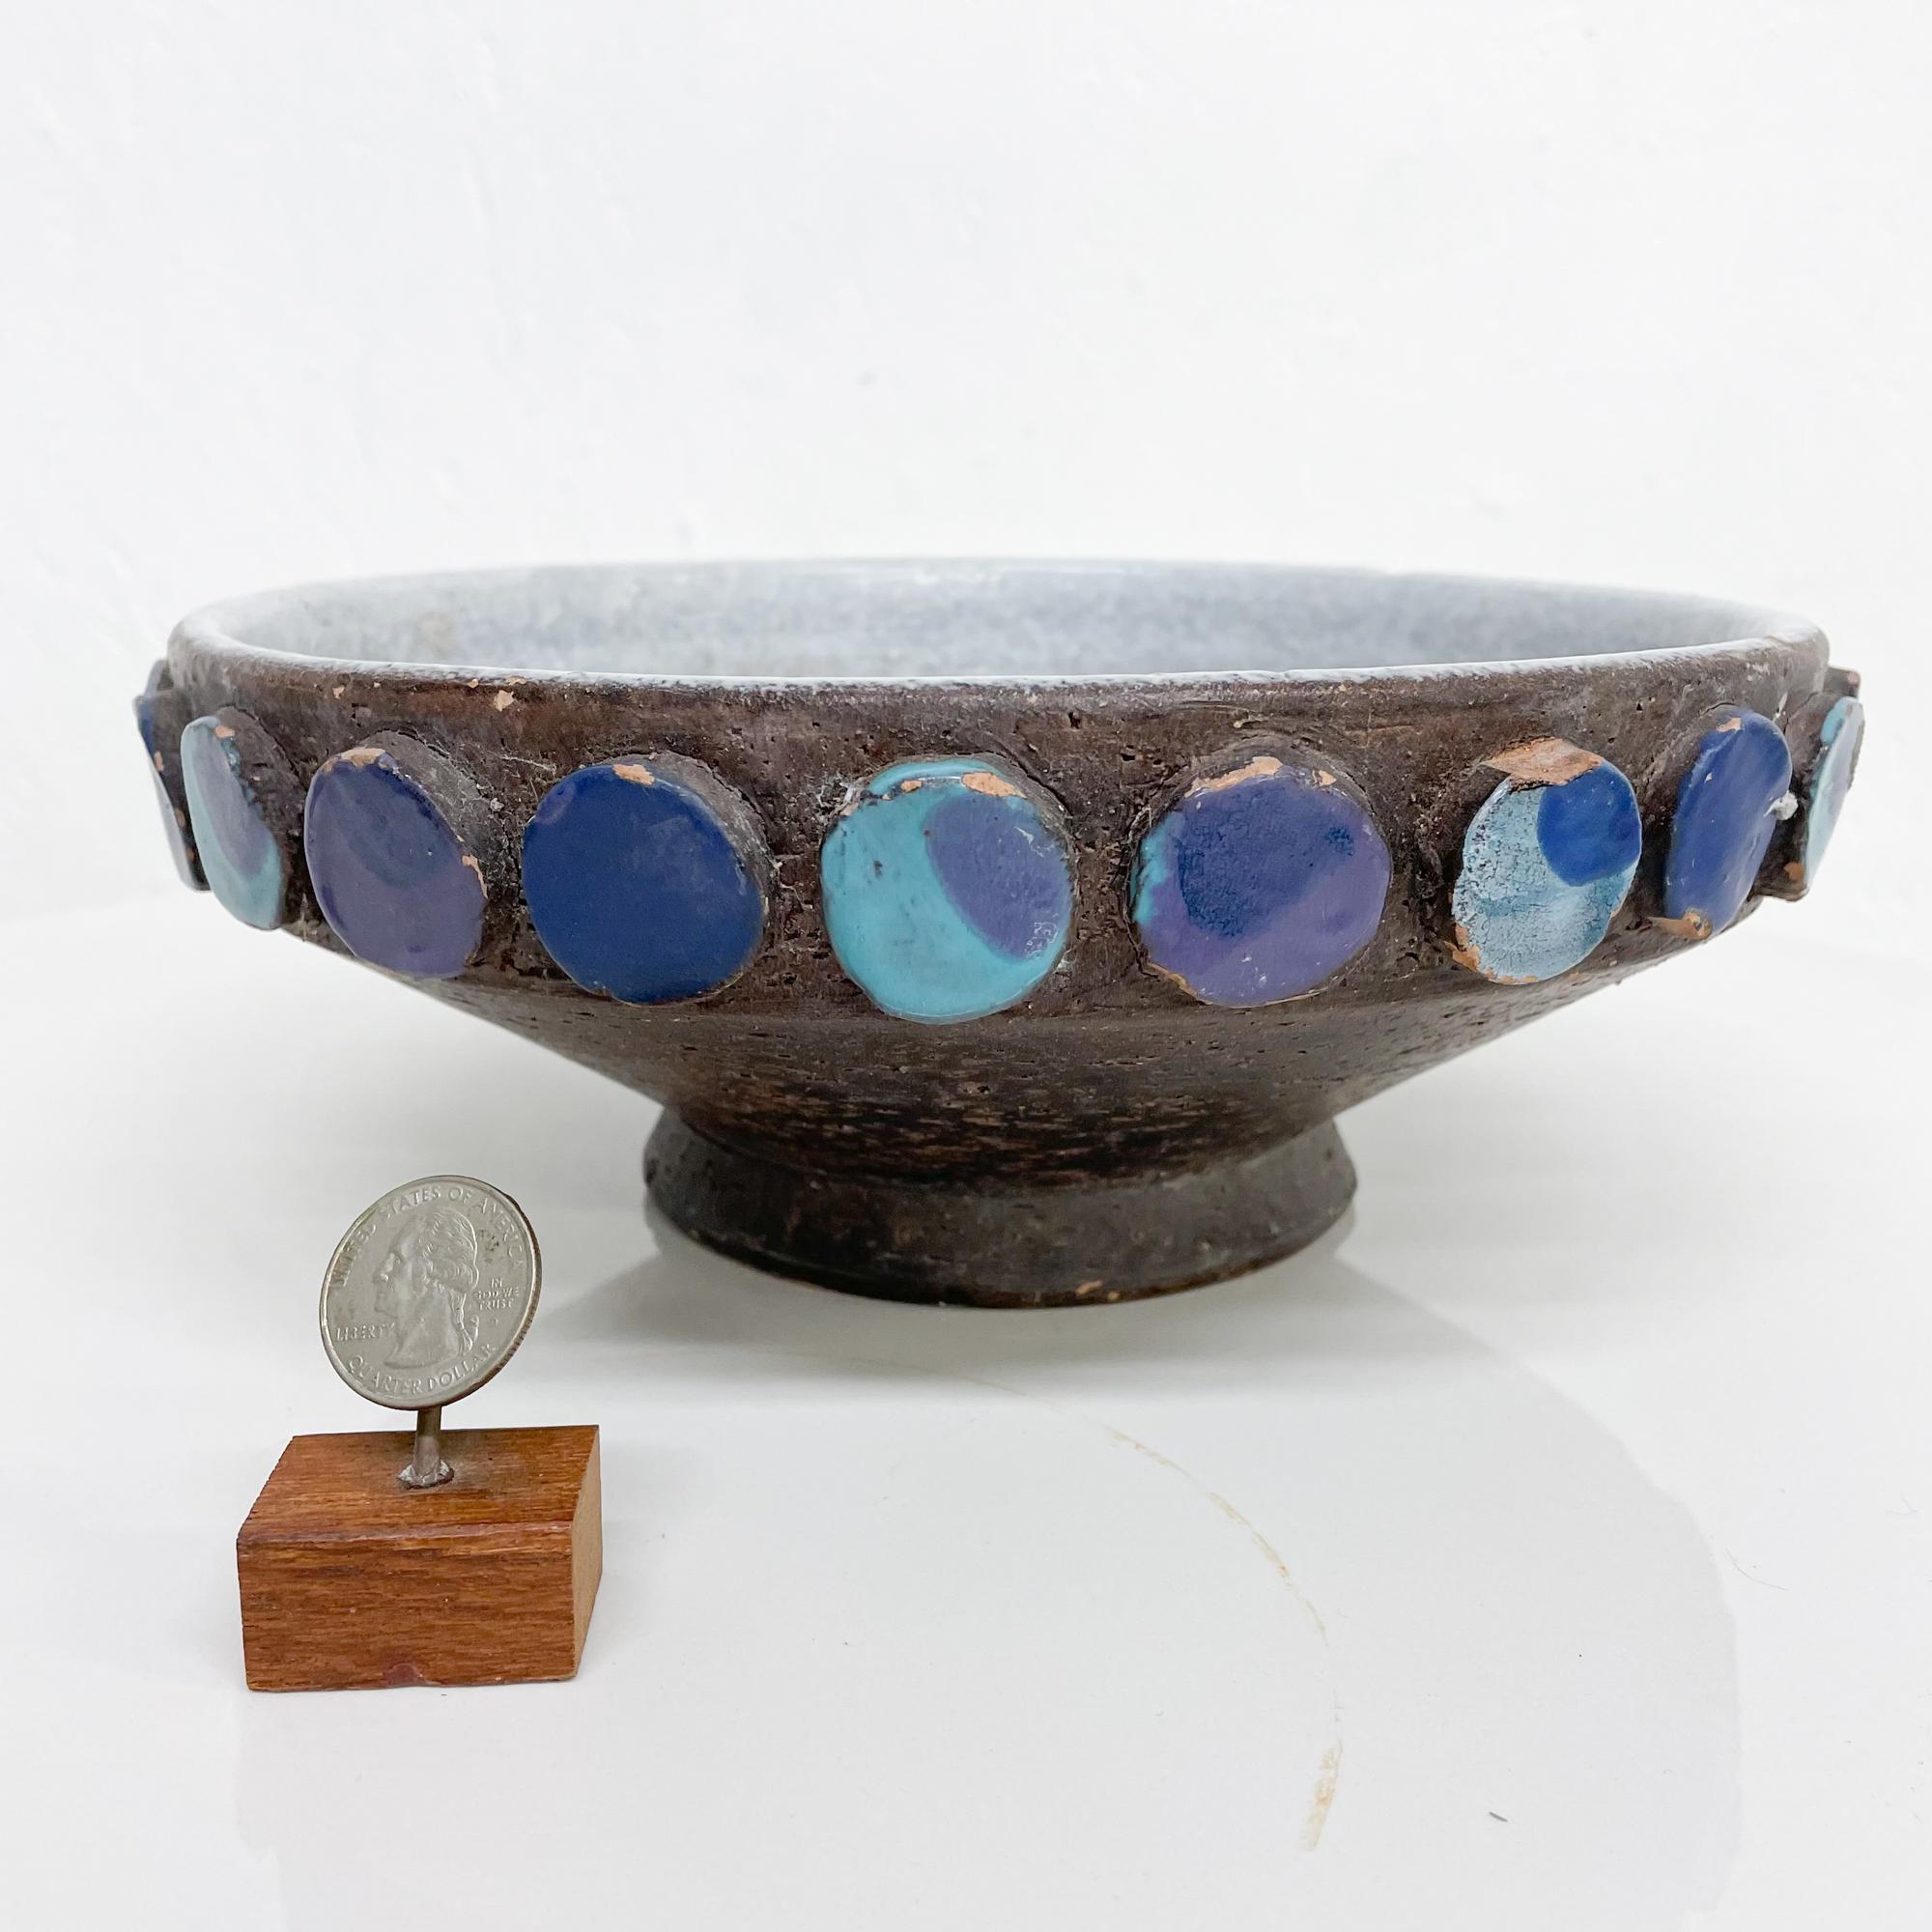 MCM 1960s Italian Pottery attributed to Bitossi Raymor 
Decorative Bowl Catch All Turquoise Medallion Design 
Signed Italy
10 in diameter x 3.75 Tall inches
Preowned Unrestored Original Vintage Condition.
Nicks present around edges.
Refer to all